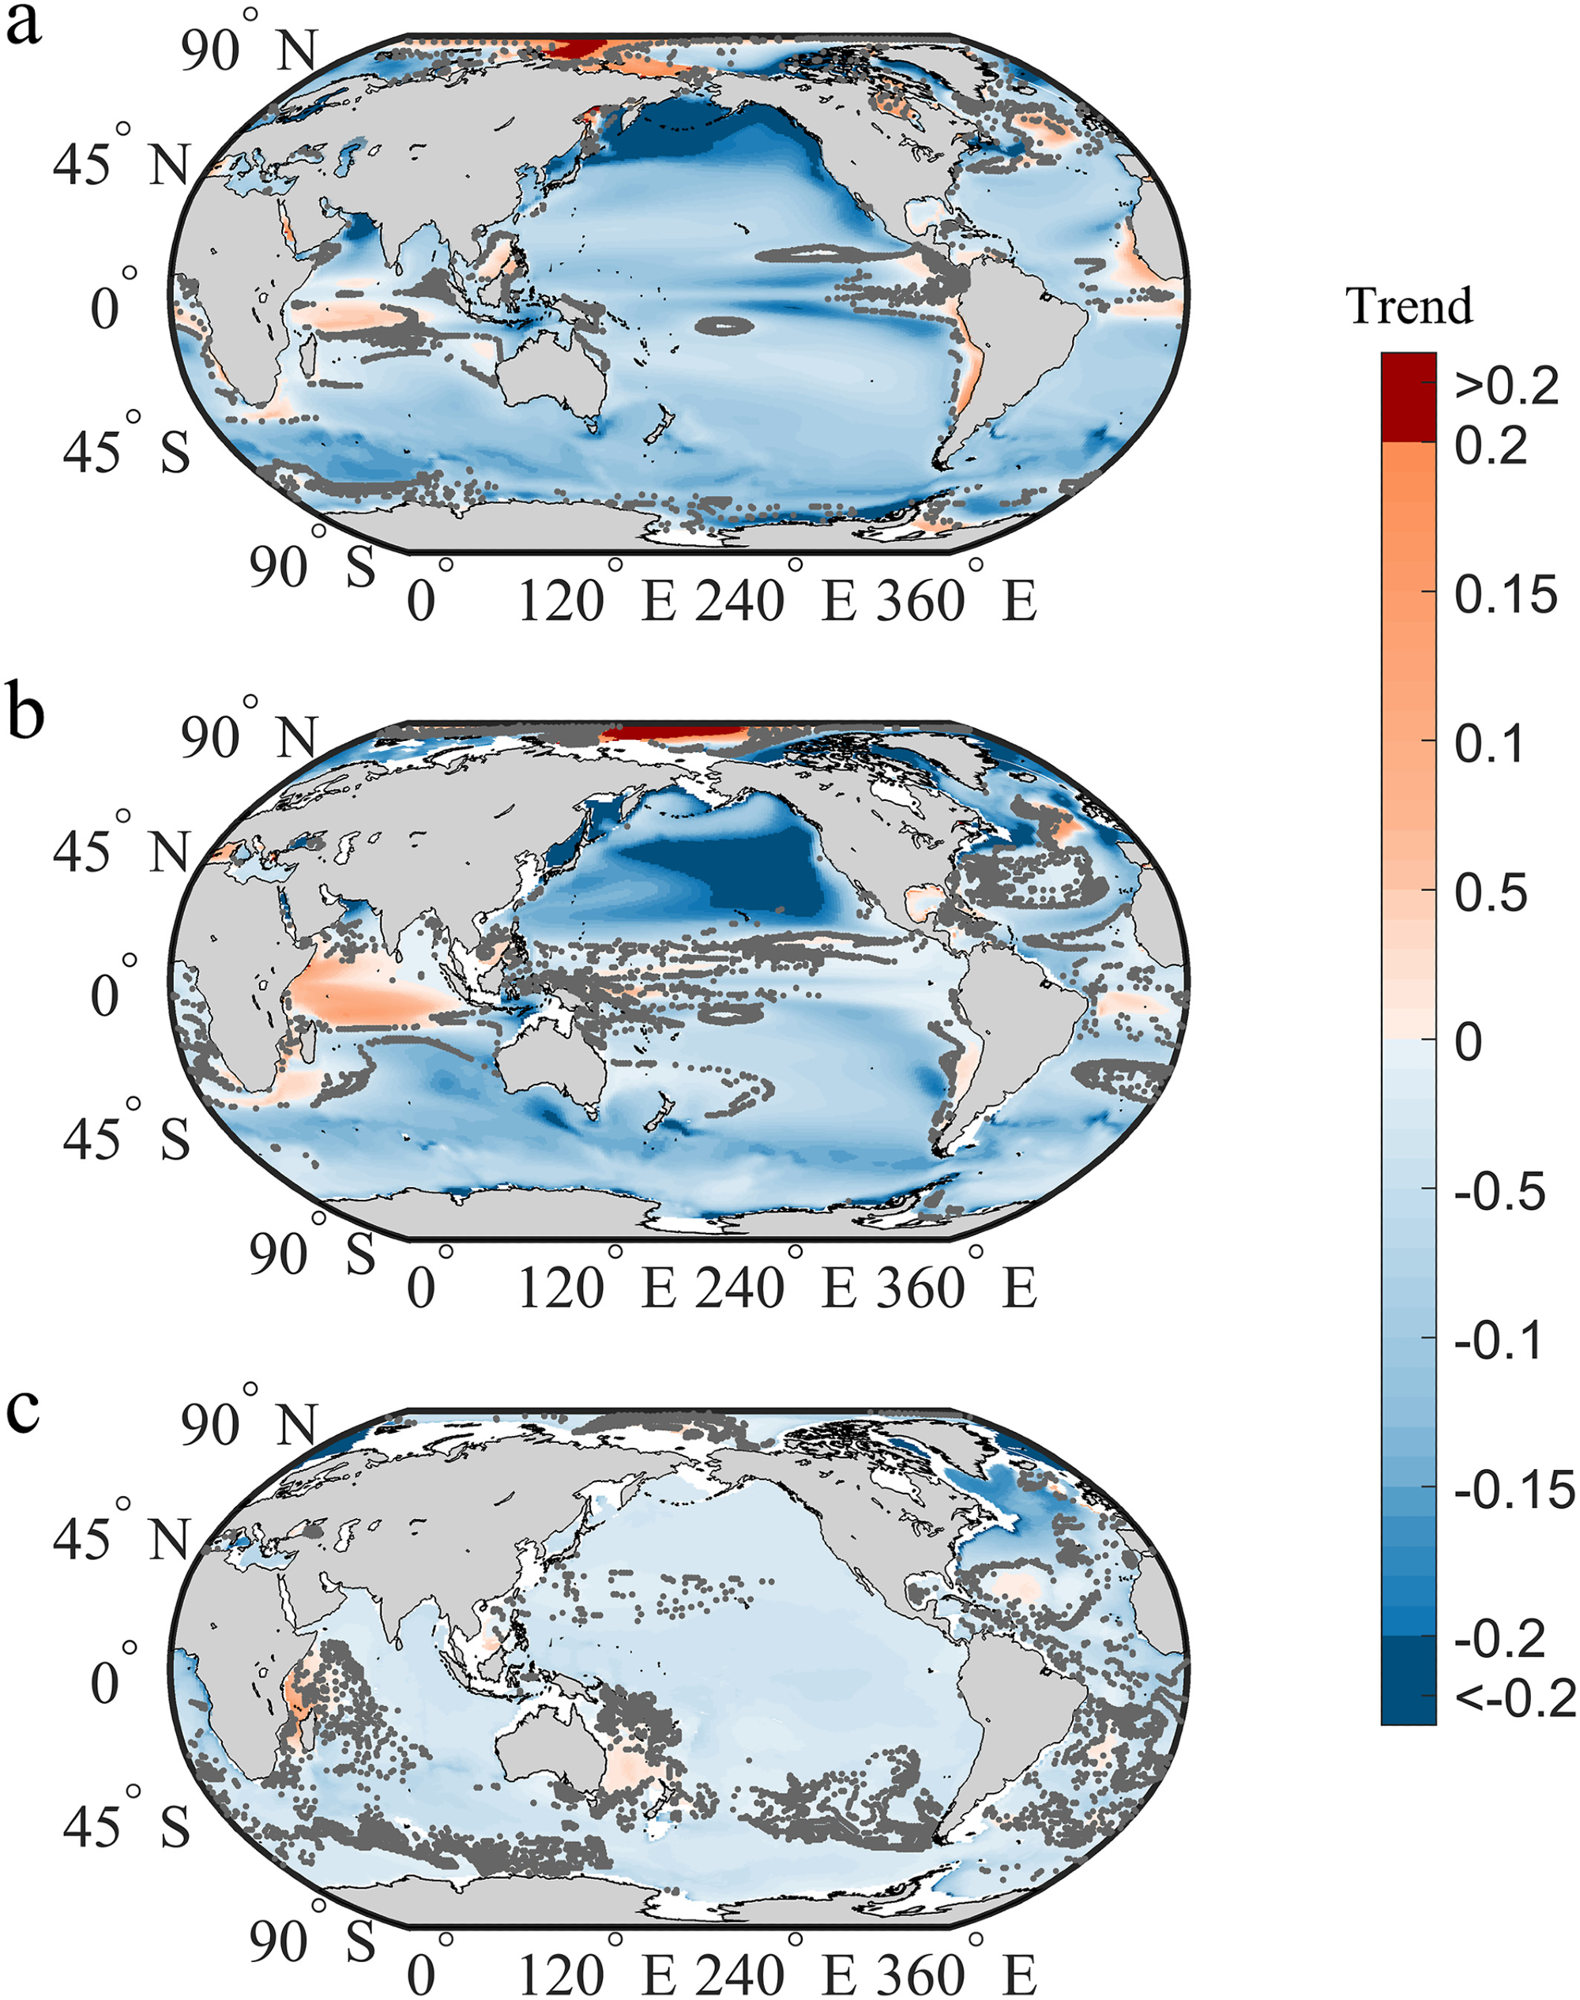 Global dissolved oxygen changes (mmol m-3 per year) from 1920 to 2100 under the RCP8.5 scenario. The linear trends of oceanic oxygen changes are estimated in the (a) epipelagic, (b) mesopelagic, and (c) bathypelagic zones. The blue and red color of color represents the deoxygenation and oxygenation, respectively. Note that the dark gray points indicate the slopes are not statistically significant at p = 0.05 level.